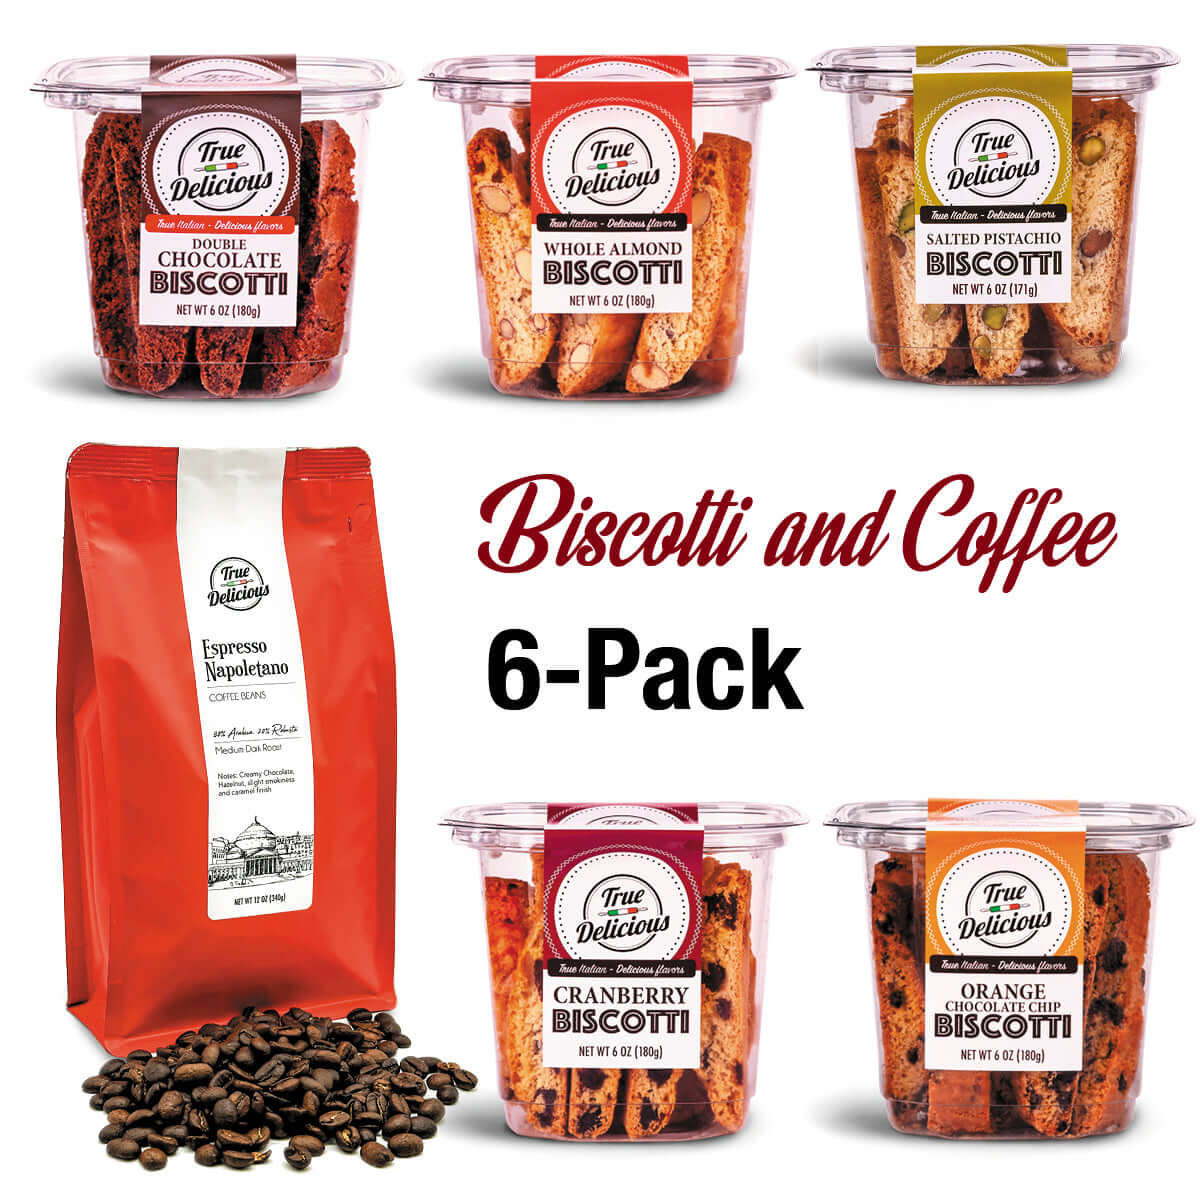 Biscotti and Coffee 6-Pack